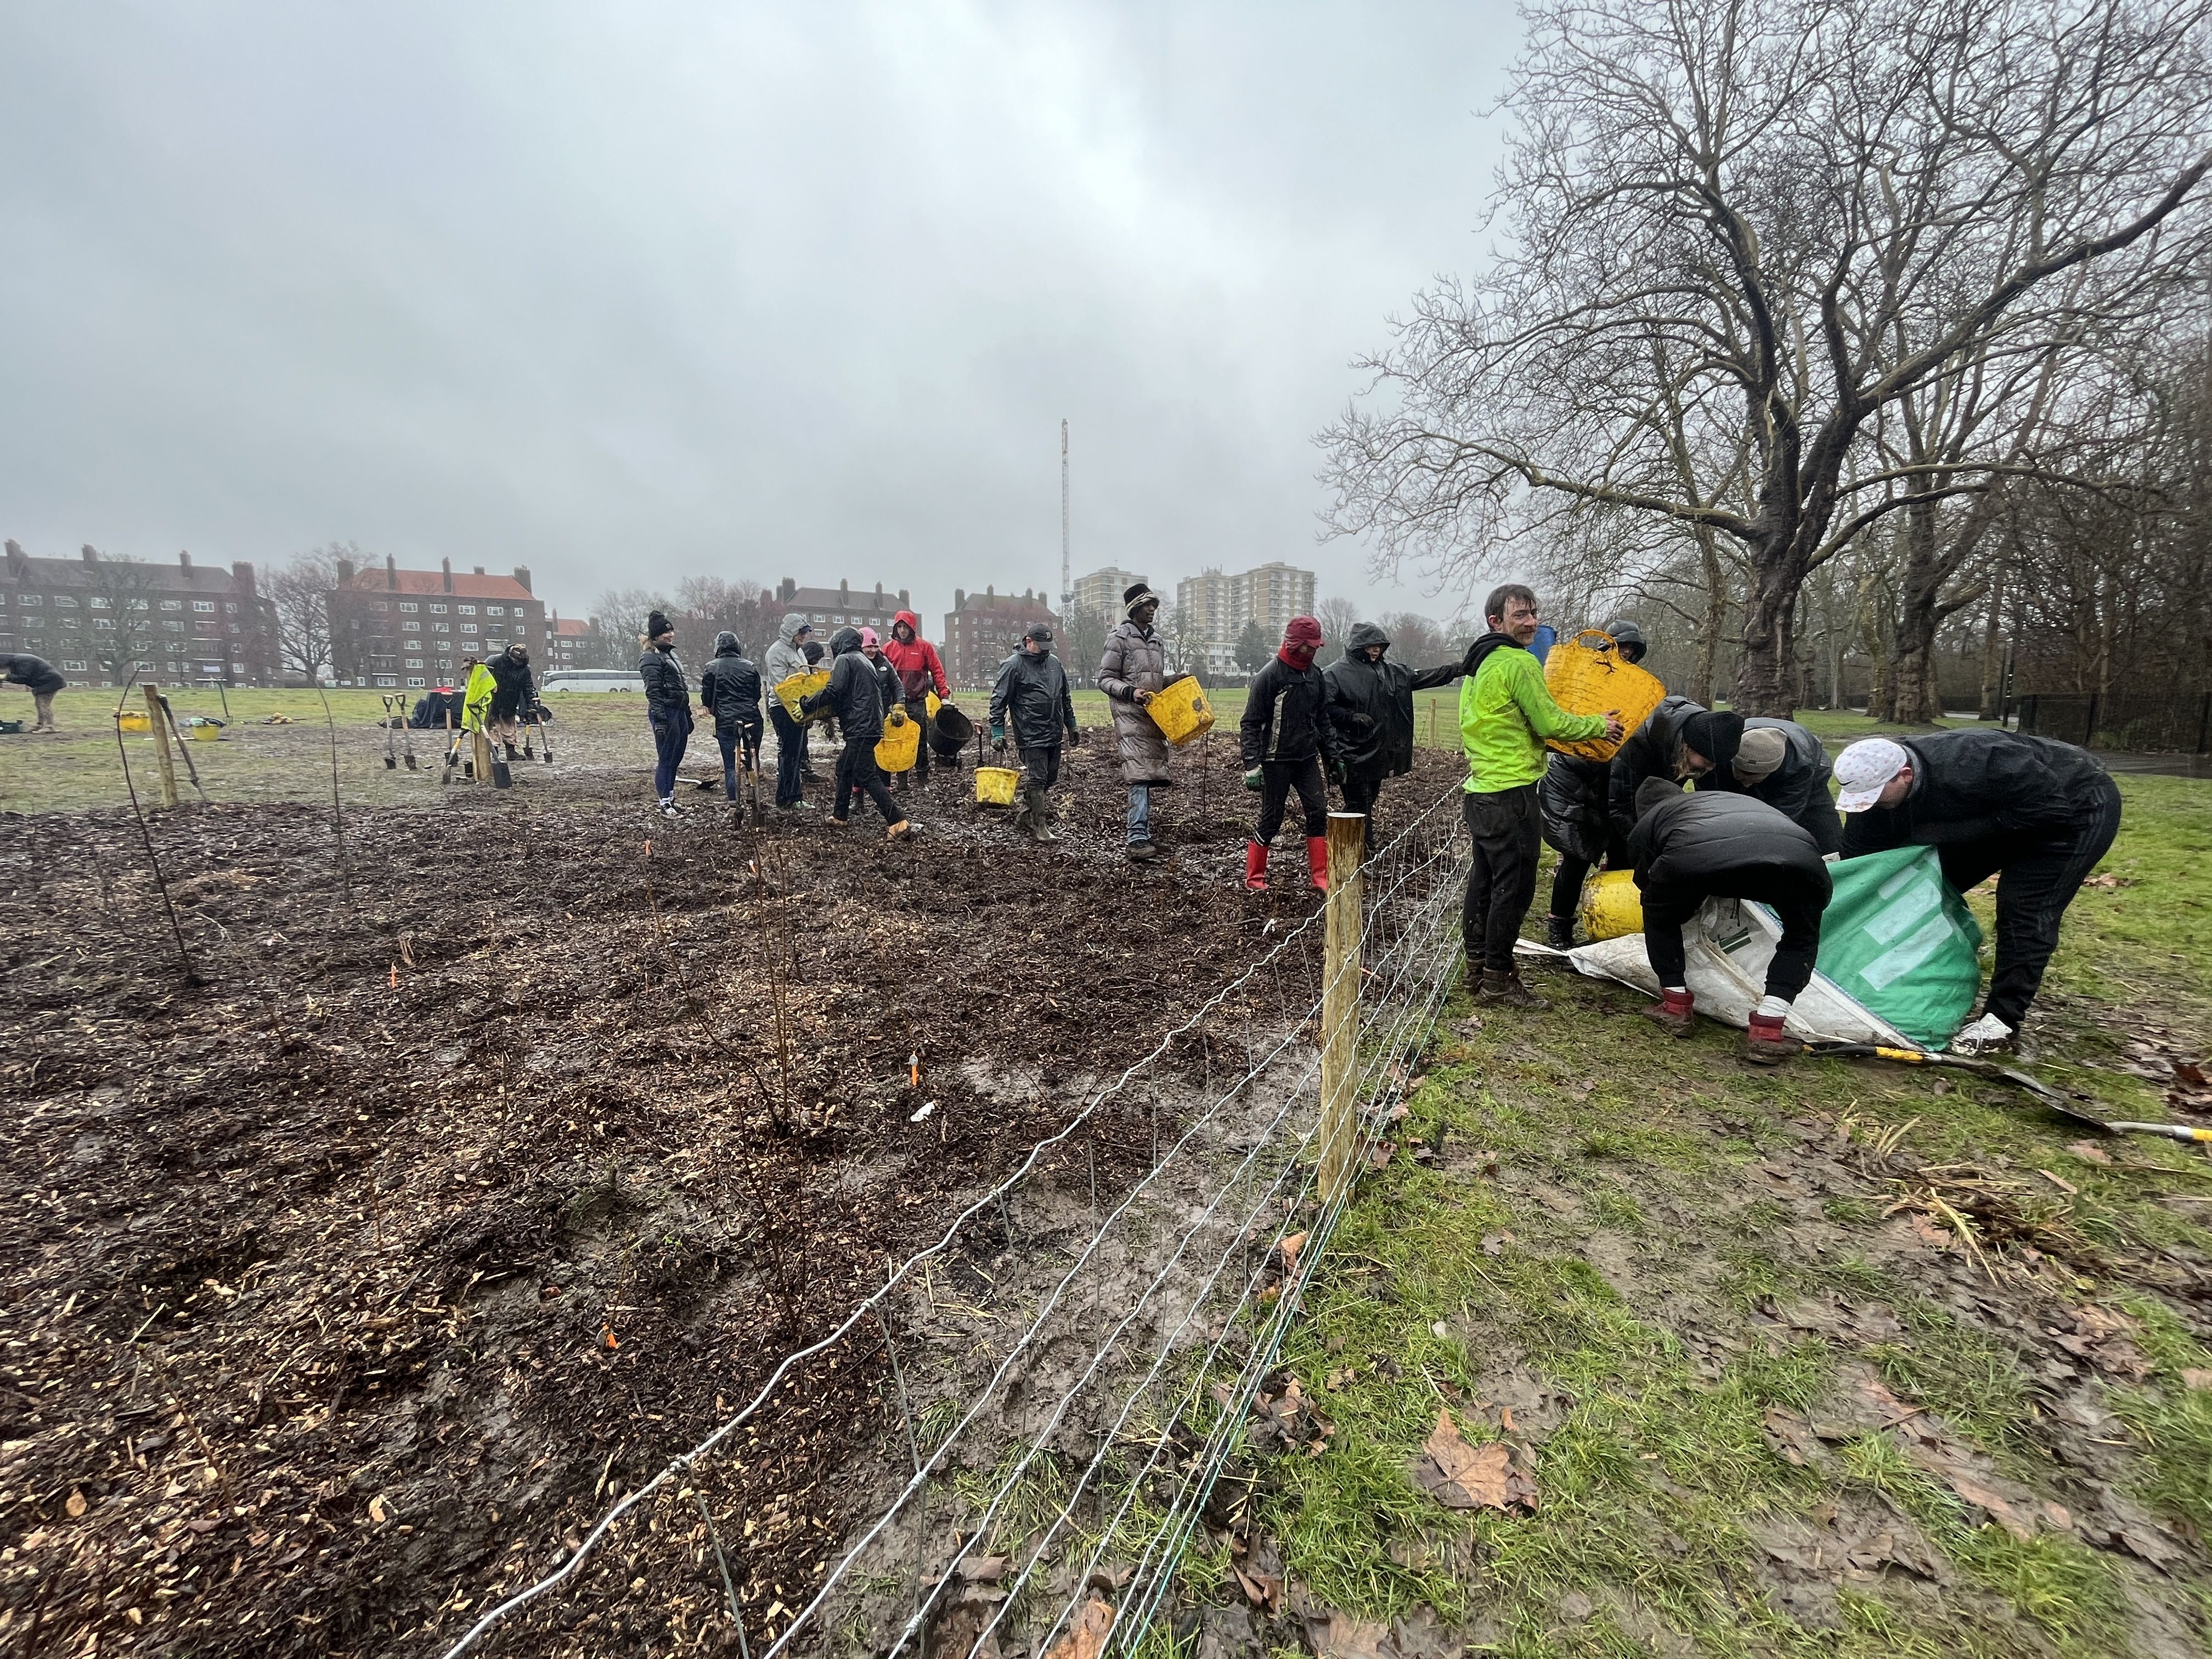 Peckham Rye Park and Common Tiny Forest. Planting day March 23 - Photo Credit Earthwatch Europe